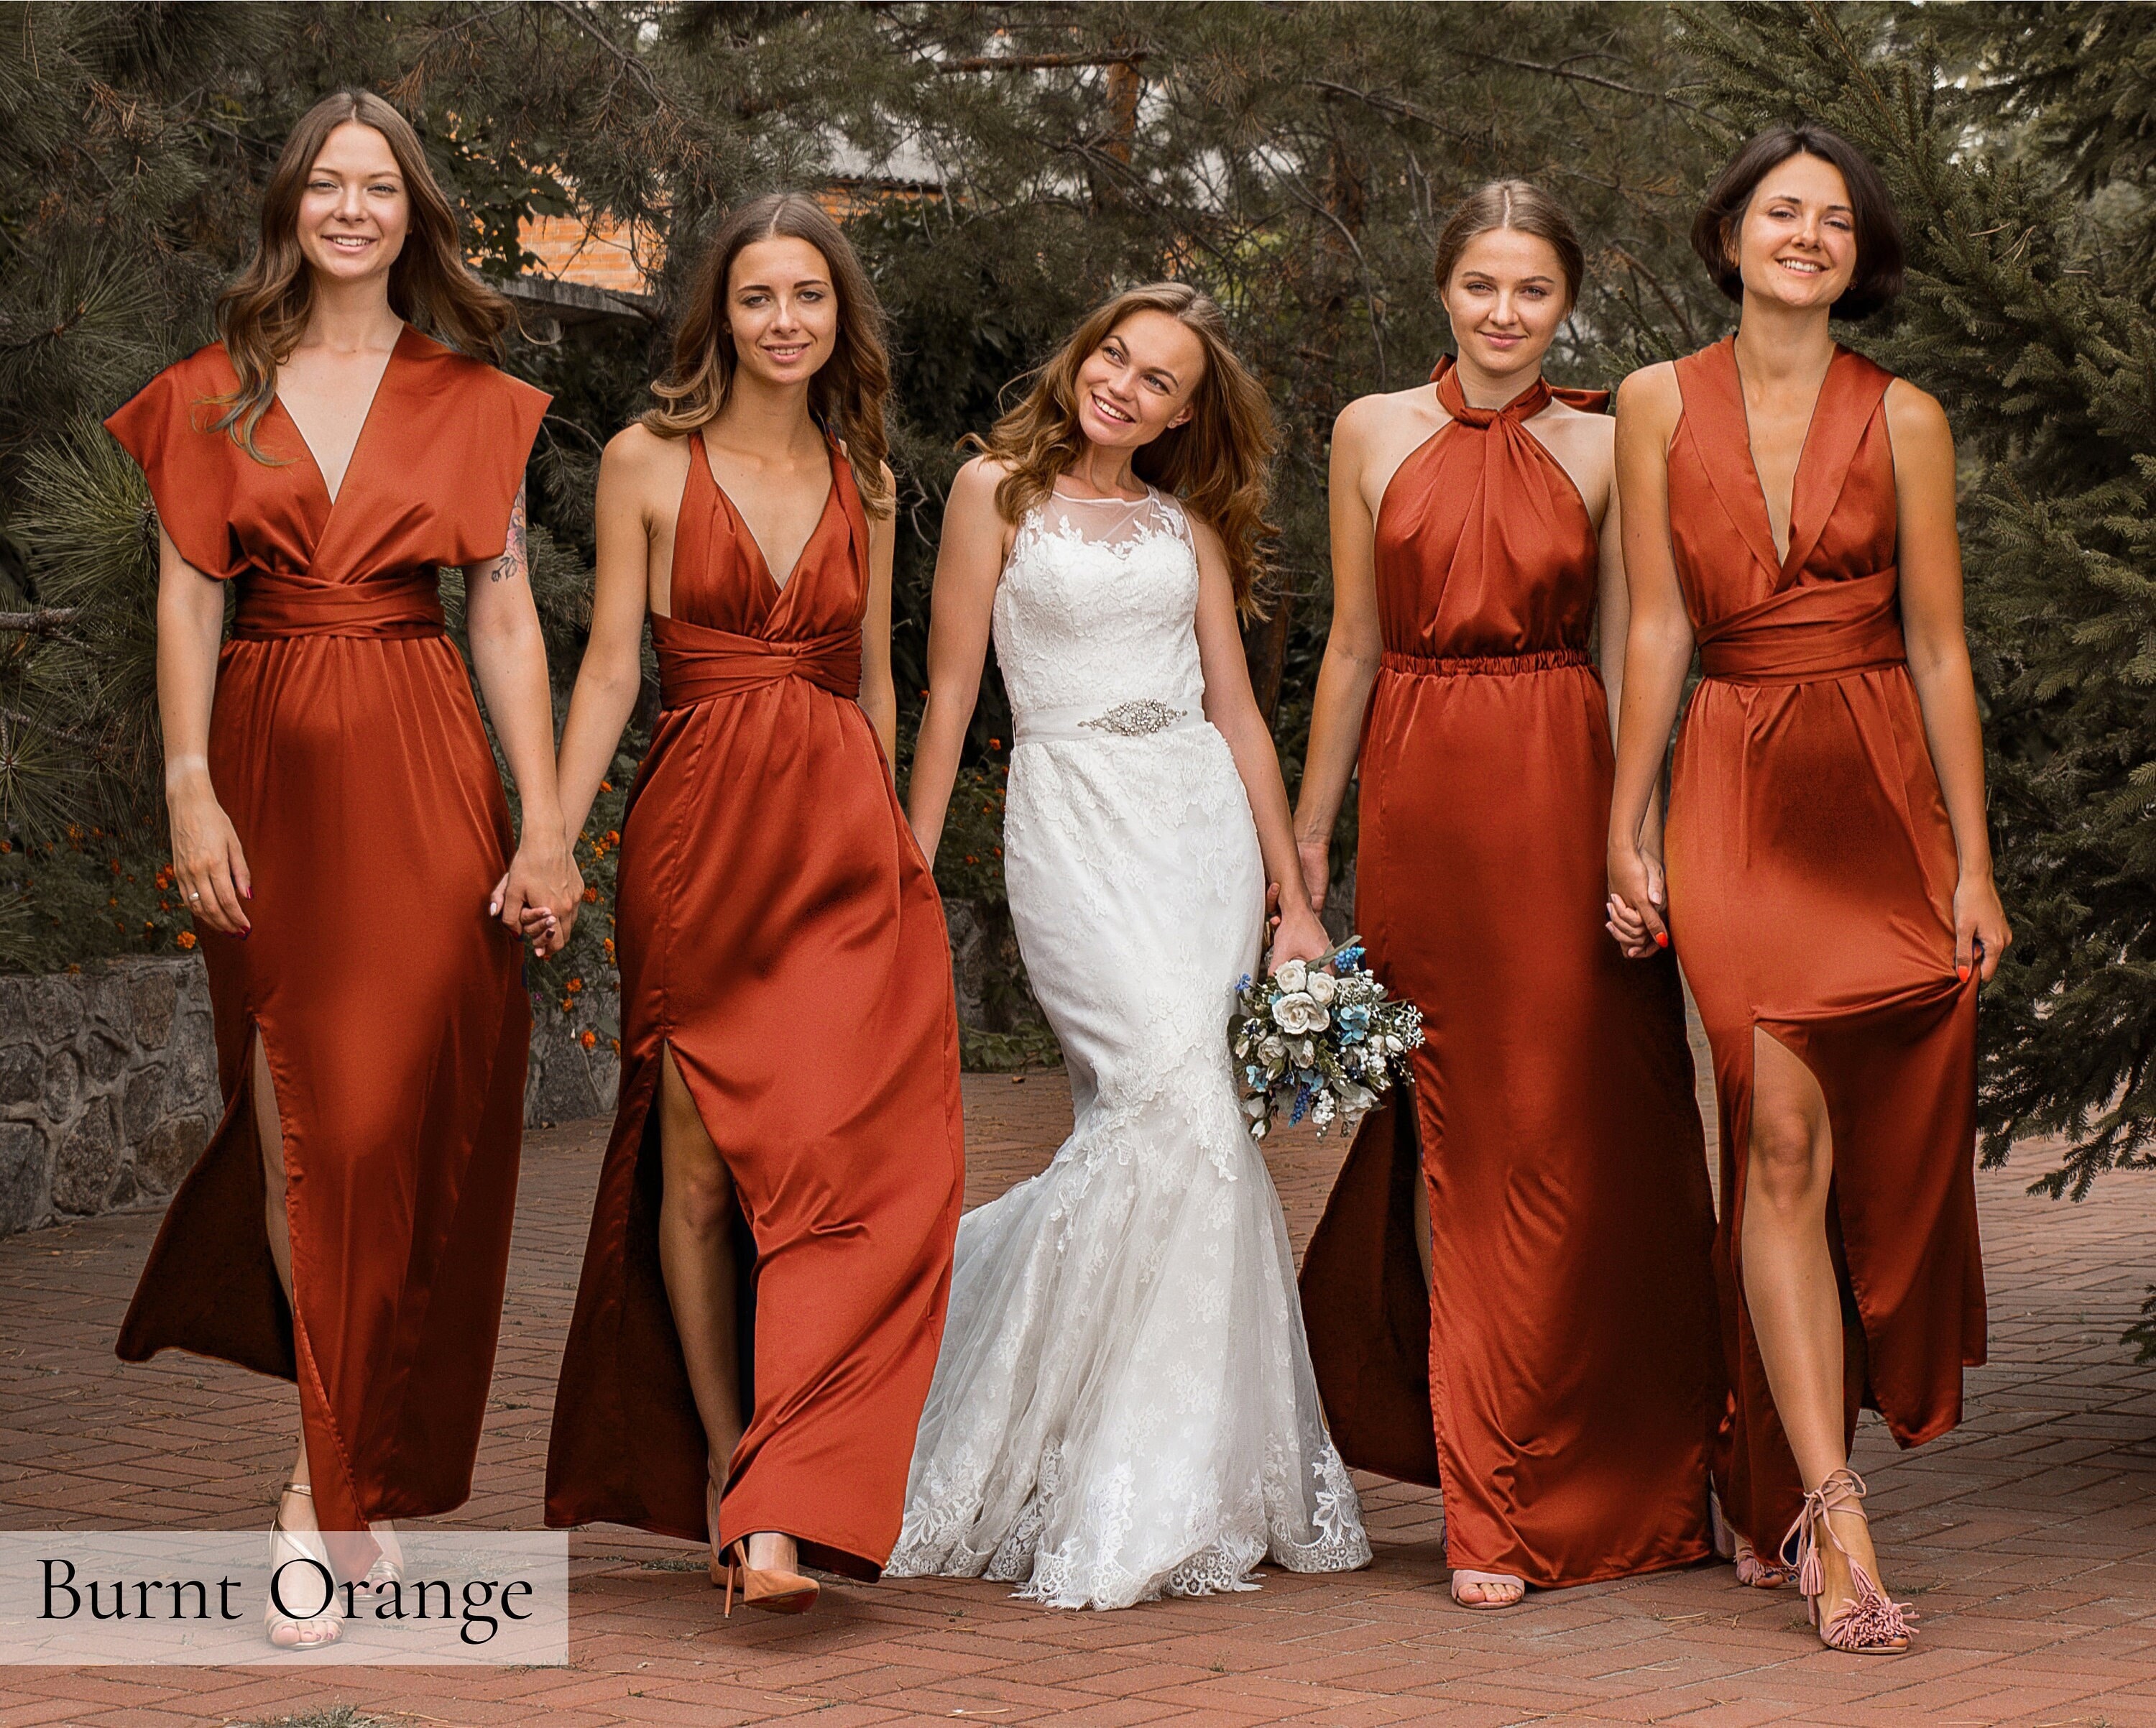 Buy a Cute Women's Coral Dress | Latest Styles of Orange Cocktail Dresses  and Formal Gowns for Every Occasion - Lulus